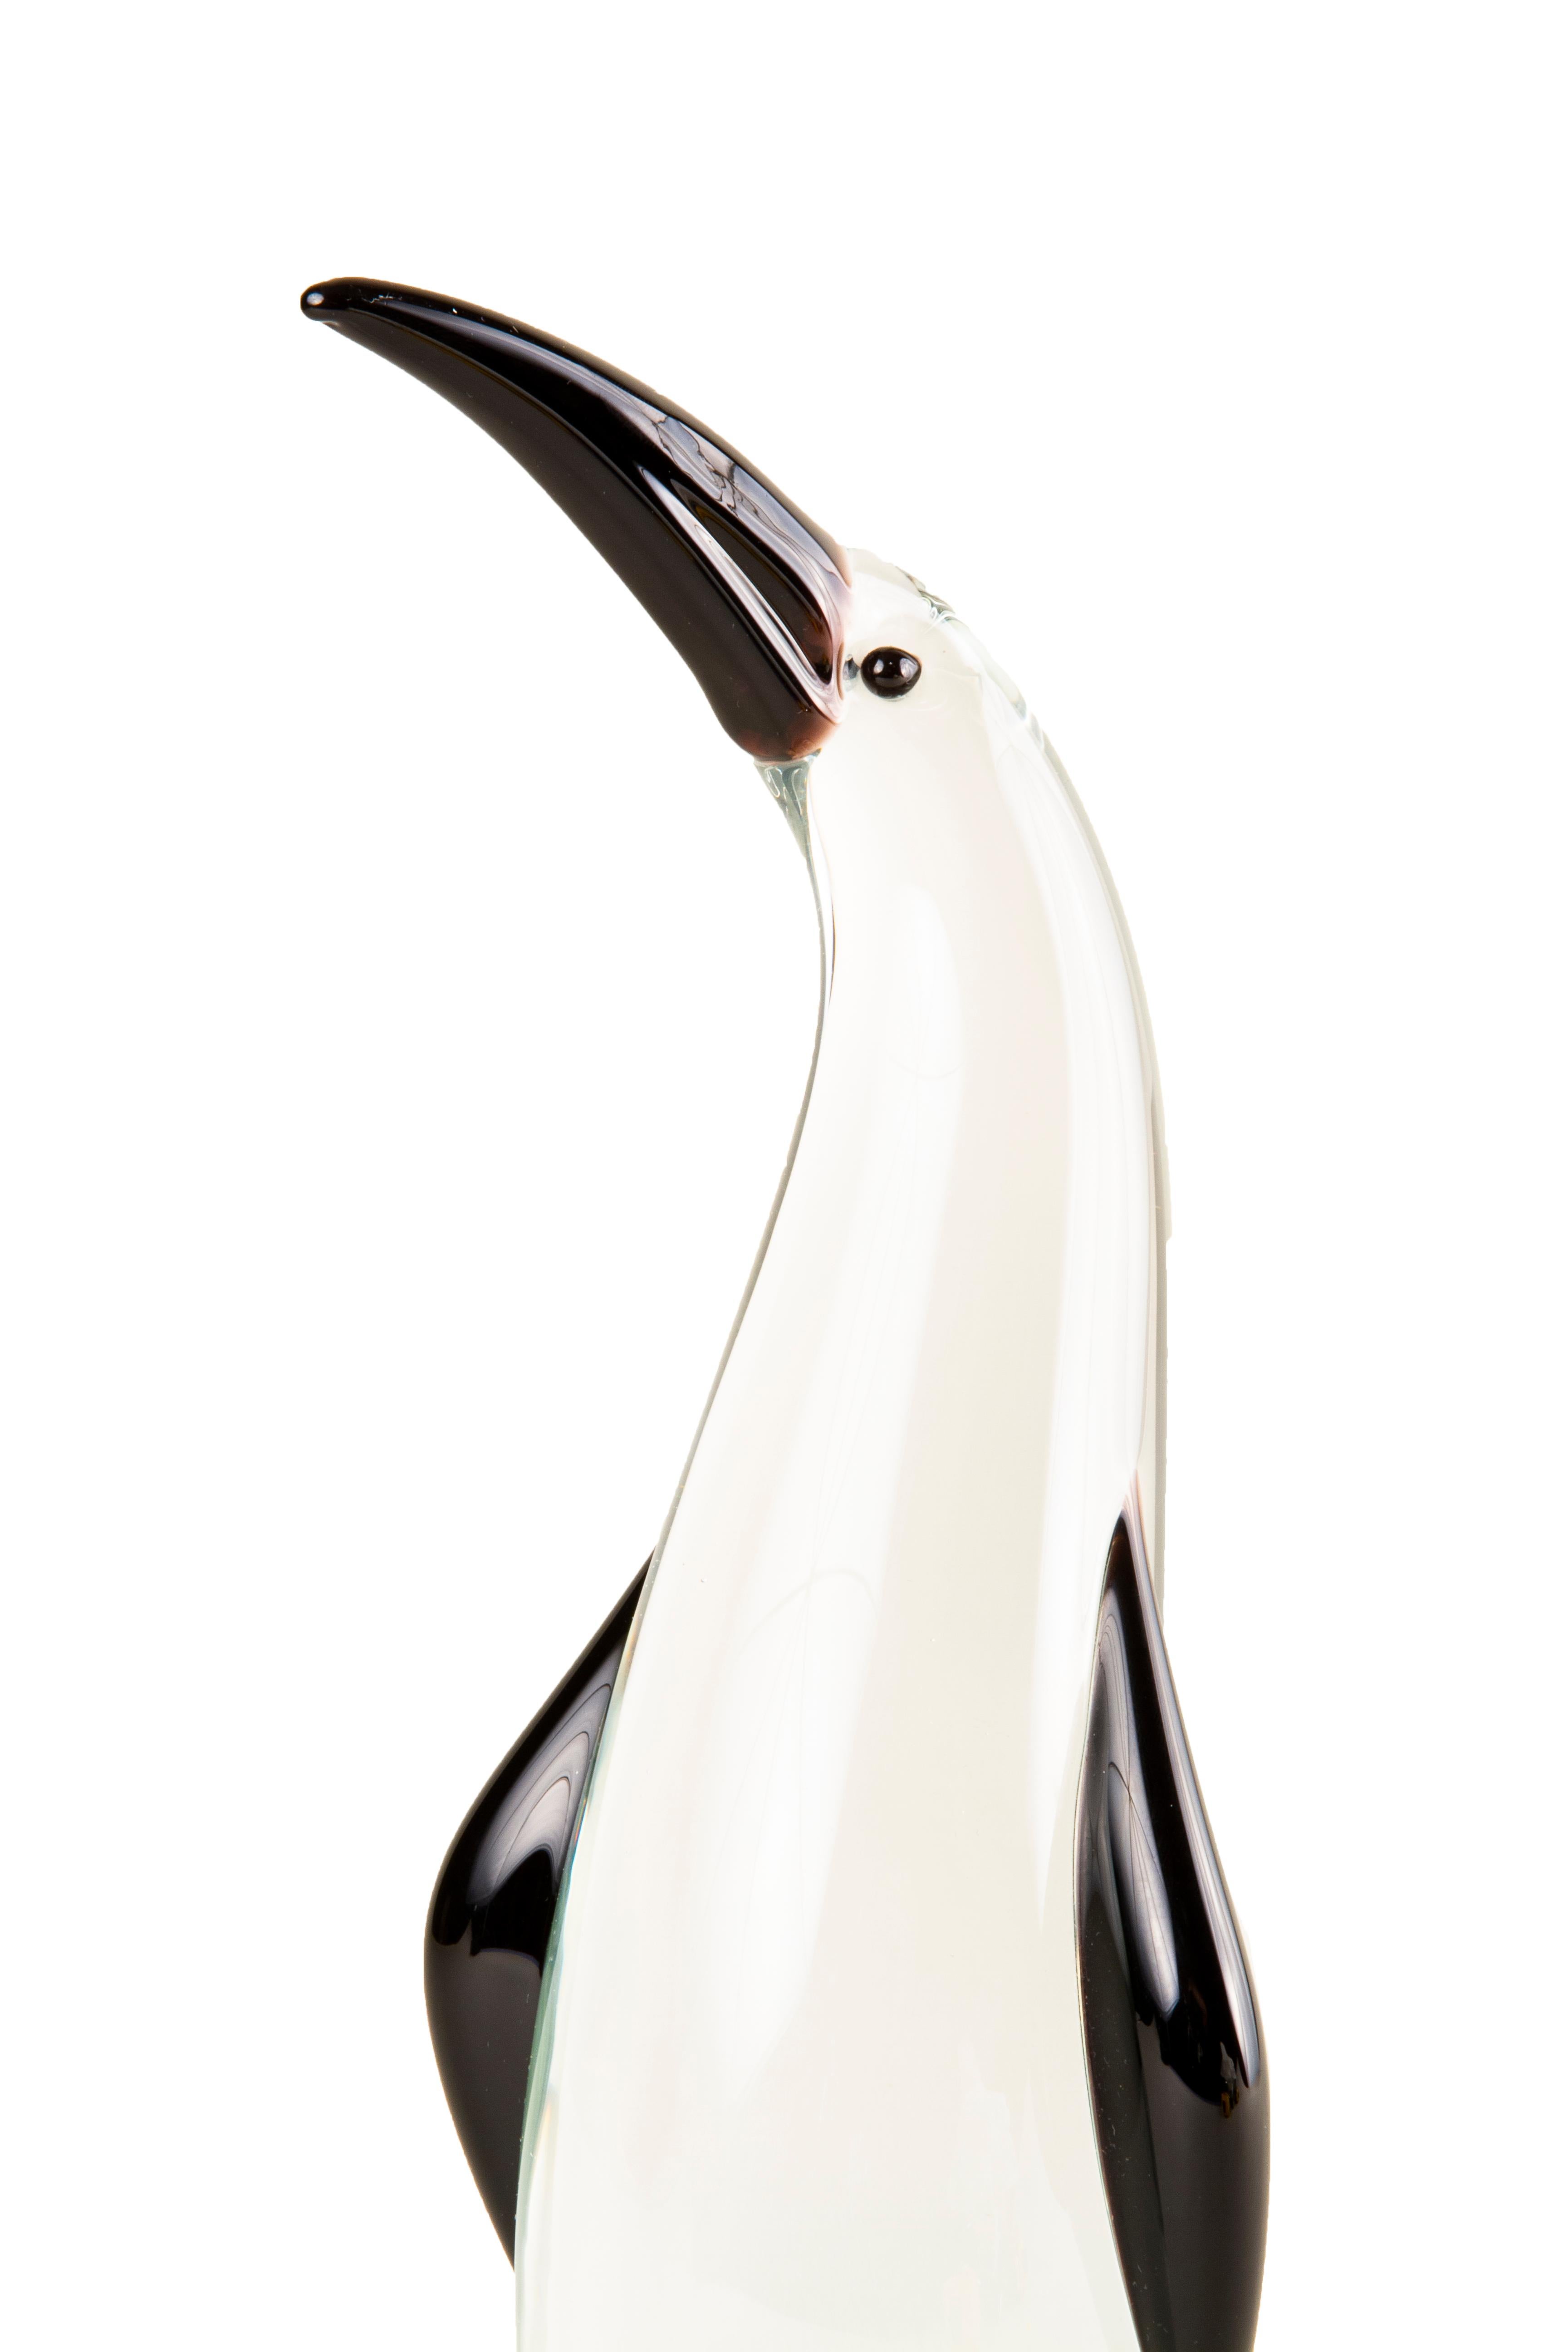 A whimsical Mid-Century Modern Italian blown art glass penguin sculpture attributed to Antonio da Ros, made for Cenedese decorated with heavy clear layered glass further decorated with an applied black/purple blown glass beak, flippers and eyes. The